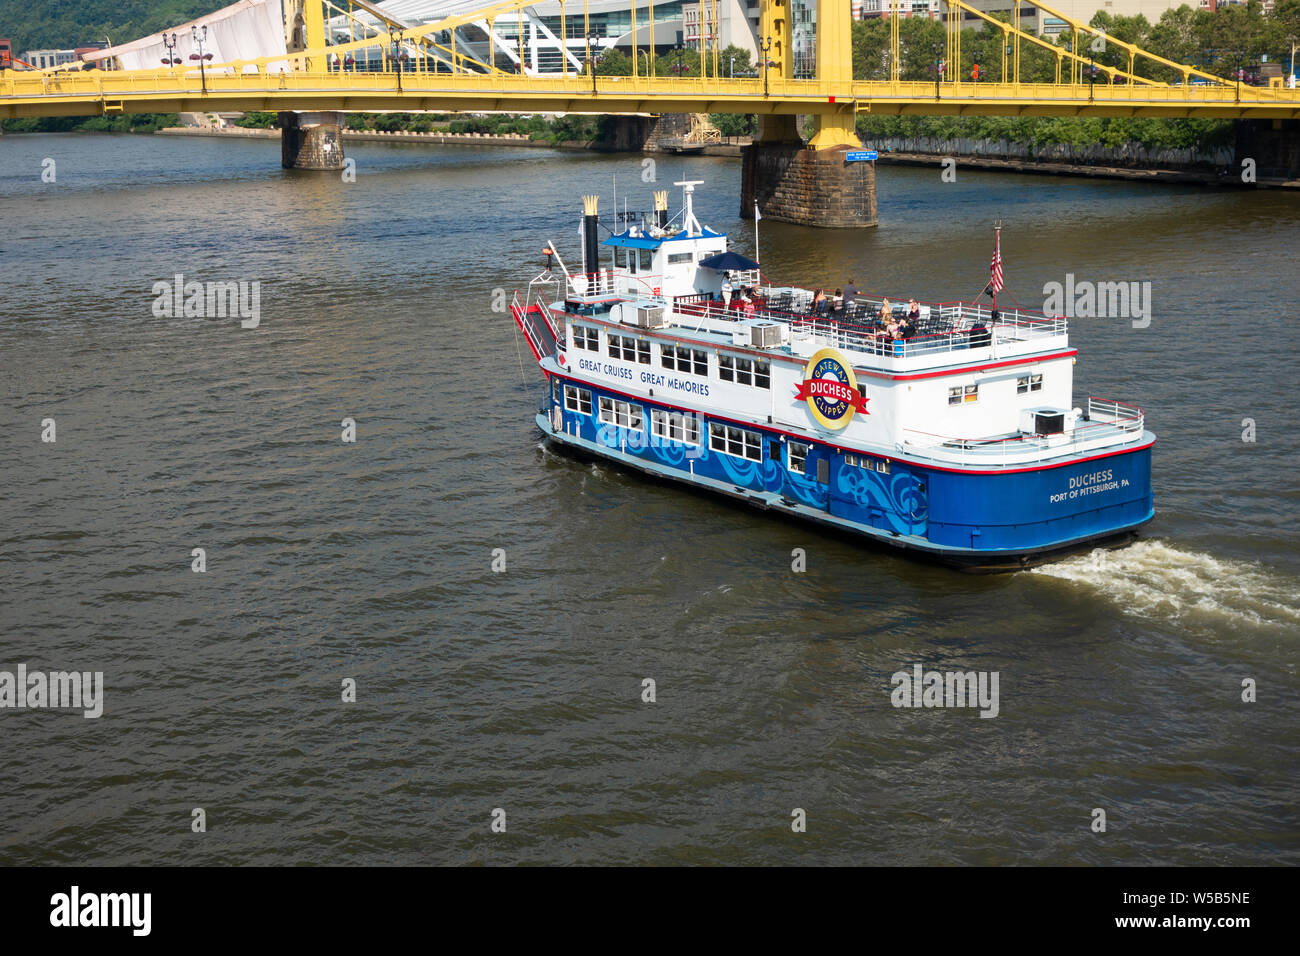 The Duchess, a river paddleboat that is part of the Gateway Clipper Fleet, passes near the Pittsburgh city skyline and the Andy Warhol Bridge. Stock Photo